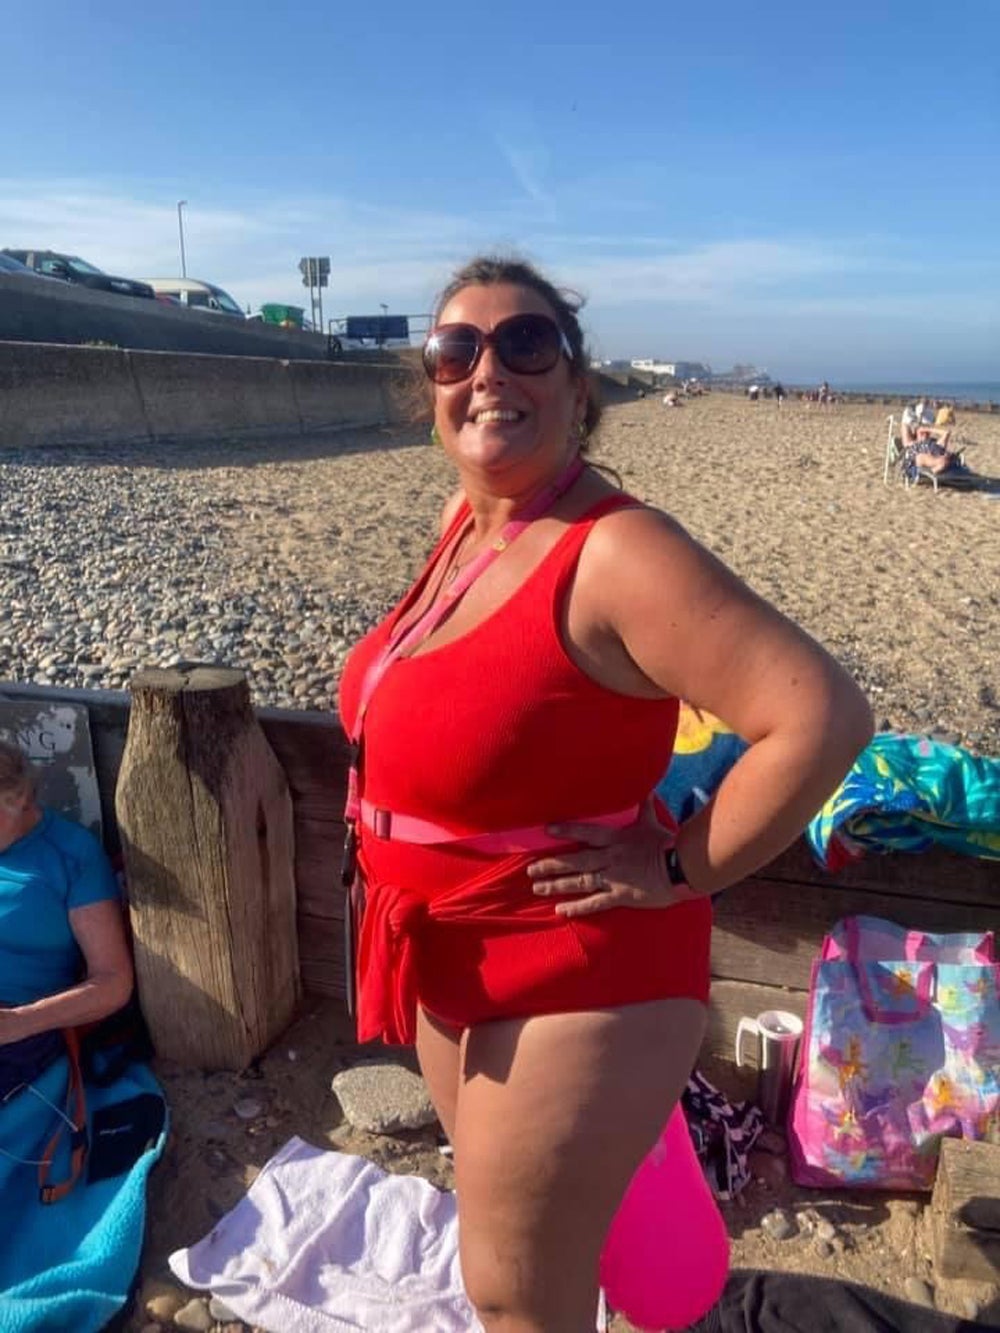 British swimmer overcomes body shame to lead 900-strong open water club The Independent